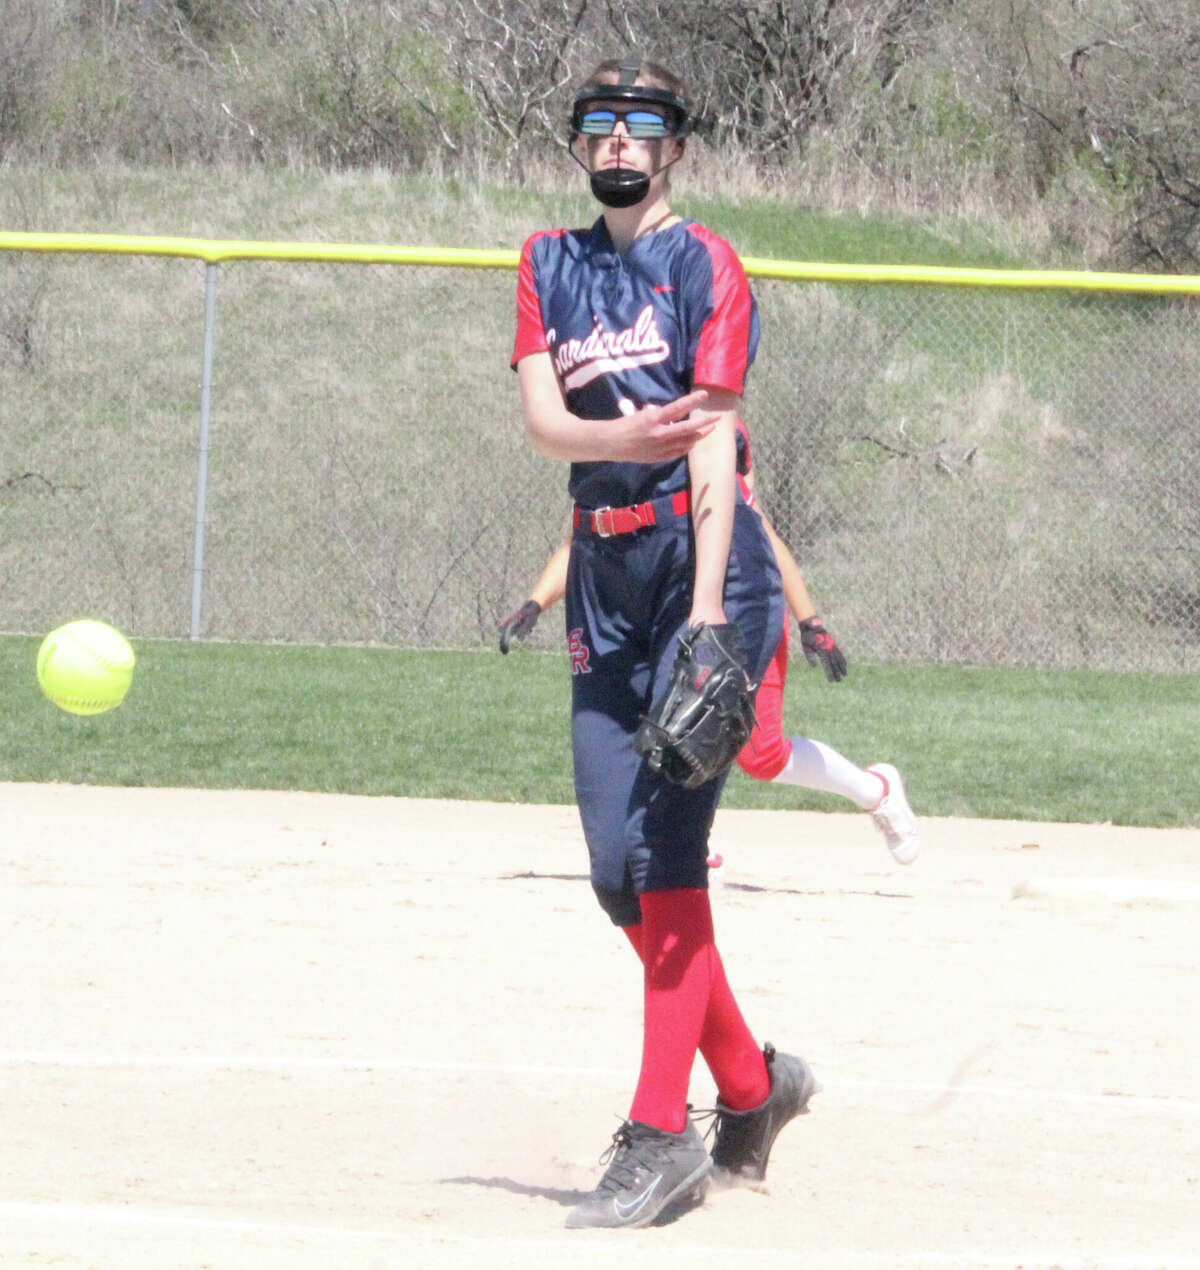 Cailin Knoop tossed a three-inning no-hitter for Big Rapids on Monday.